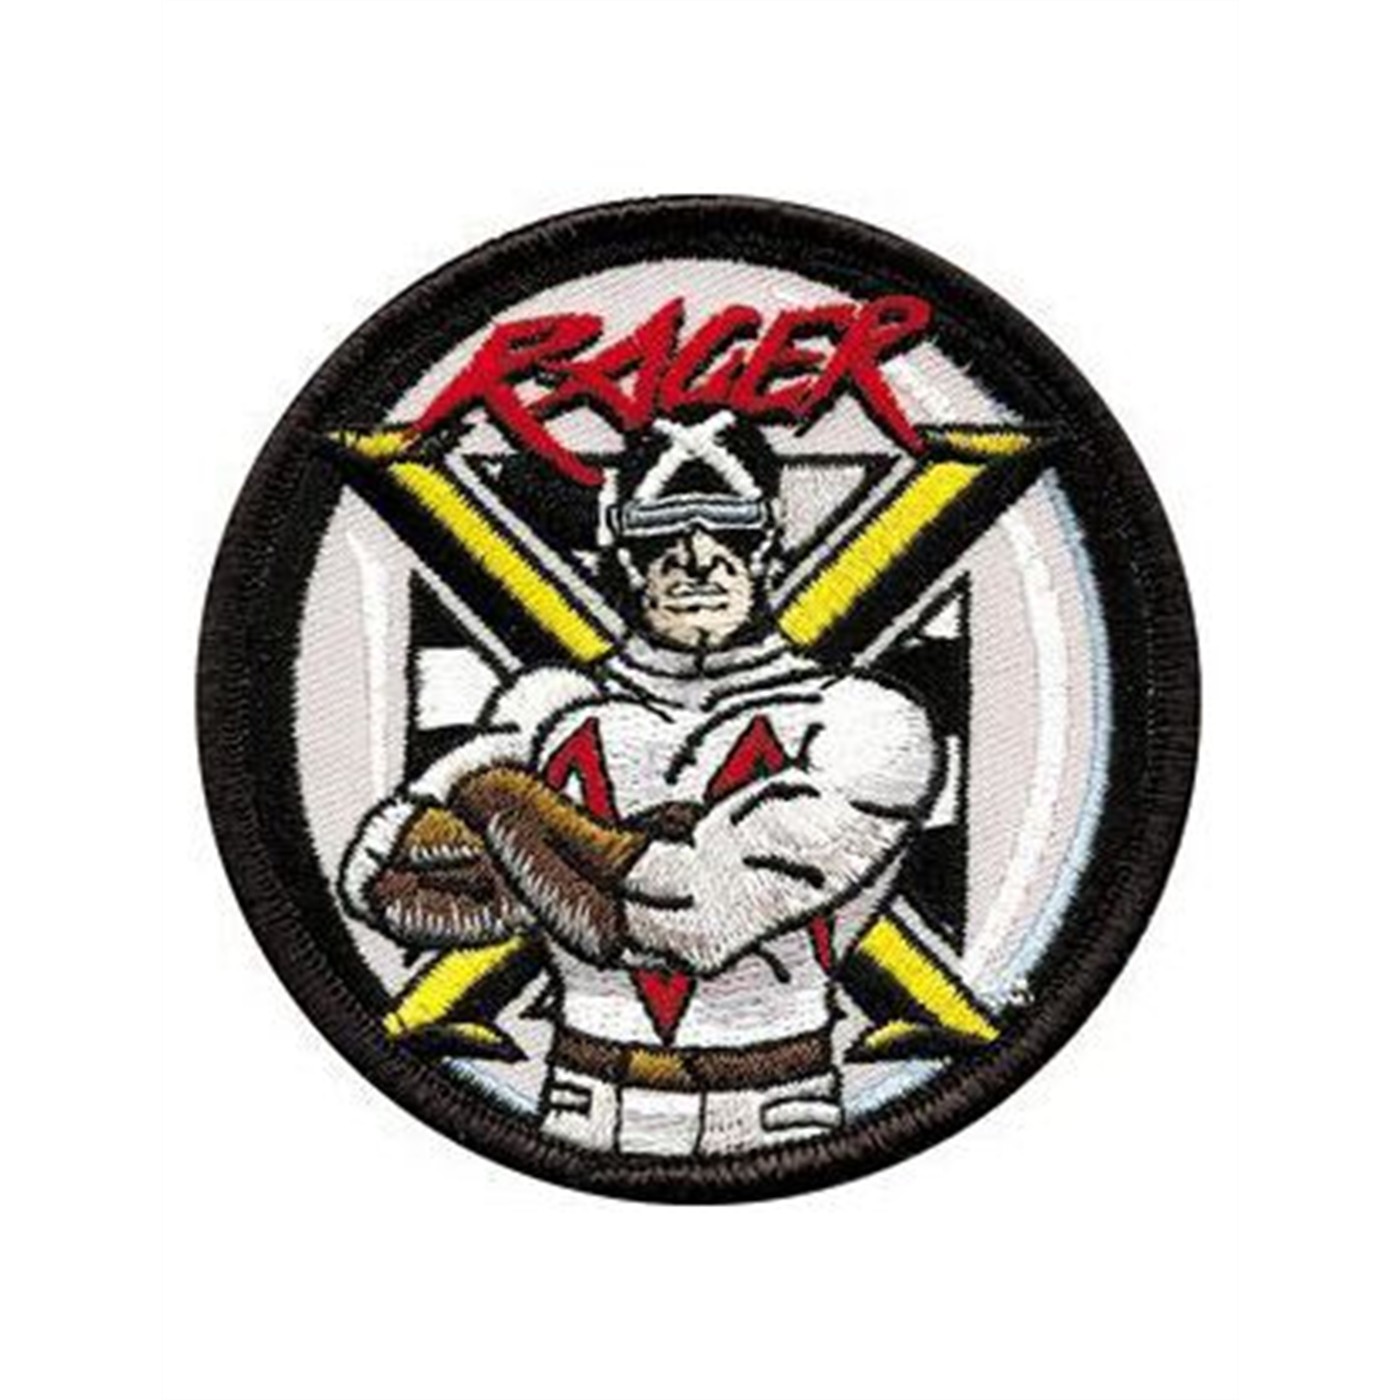 Racer X Patch